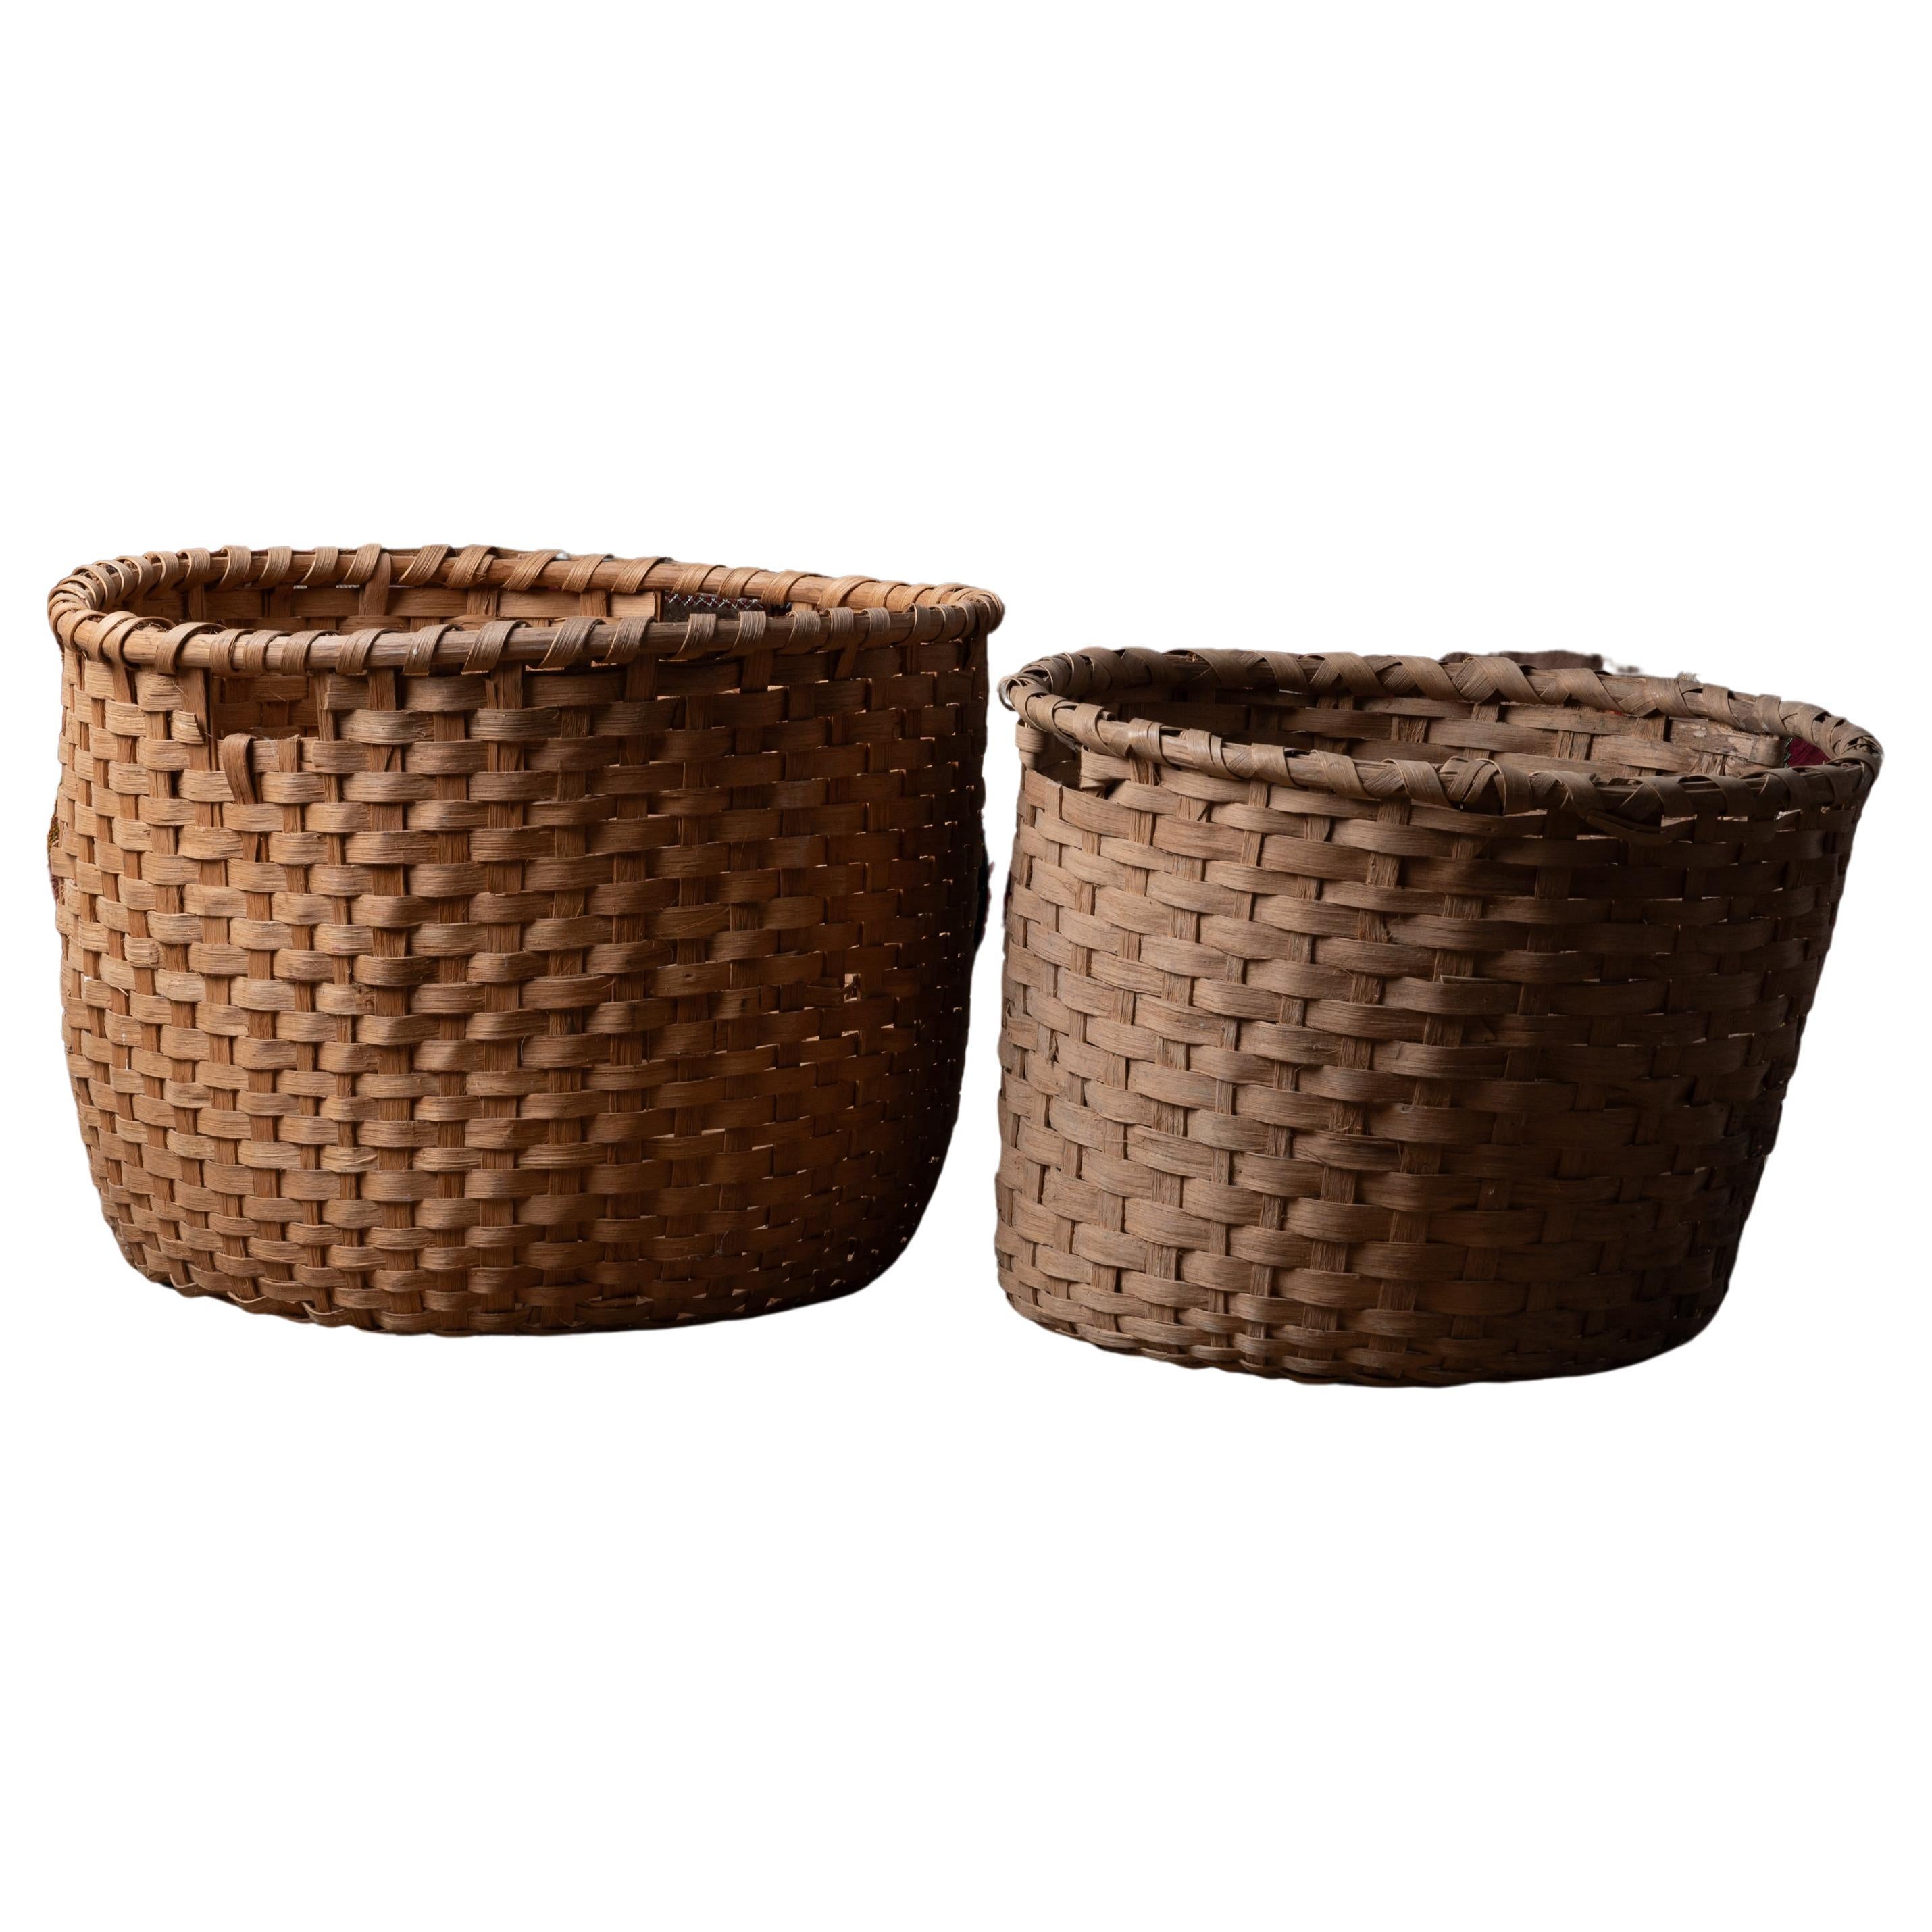 South Georgia Cotton Picking Baskets - A Pair For Sale